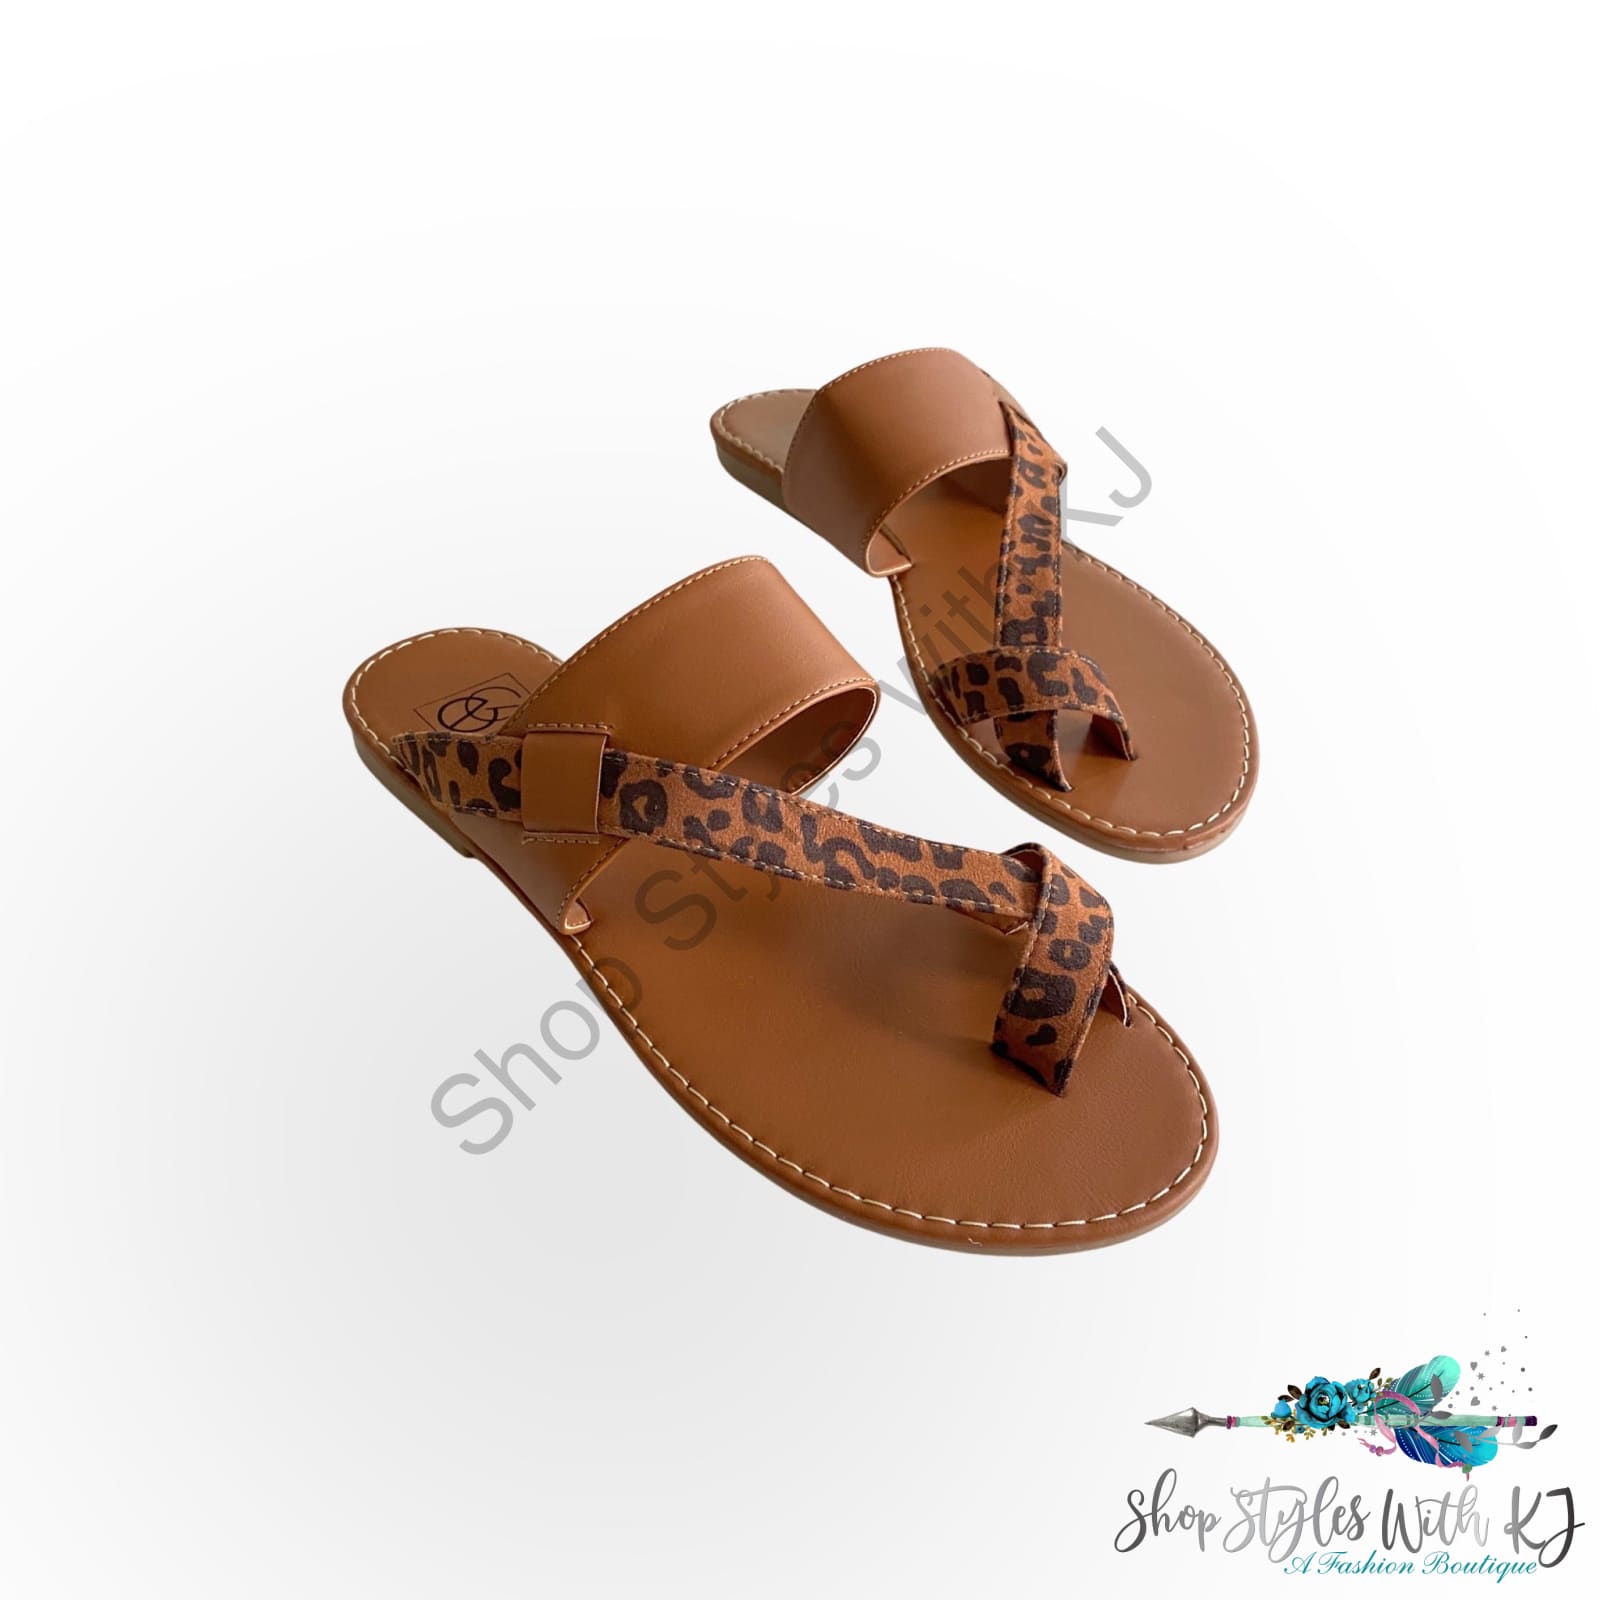 Born This Way Sandals Miami Shoes